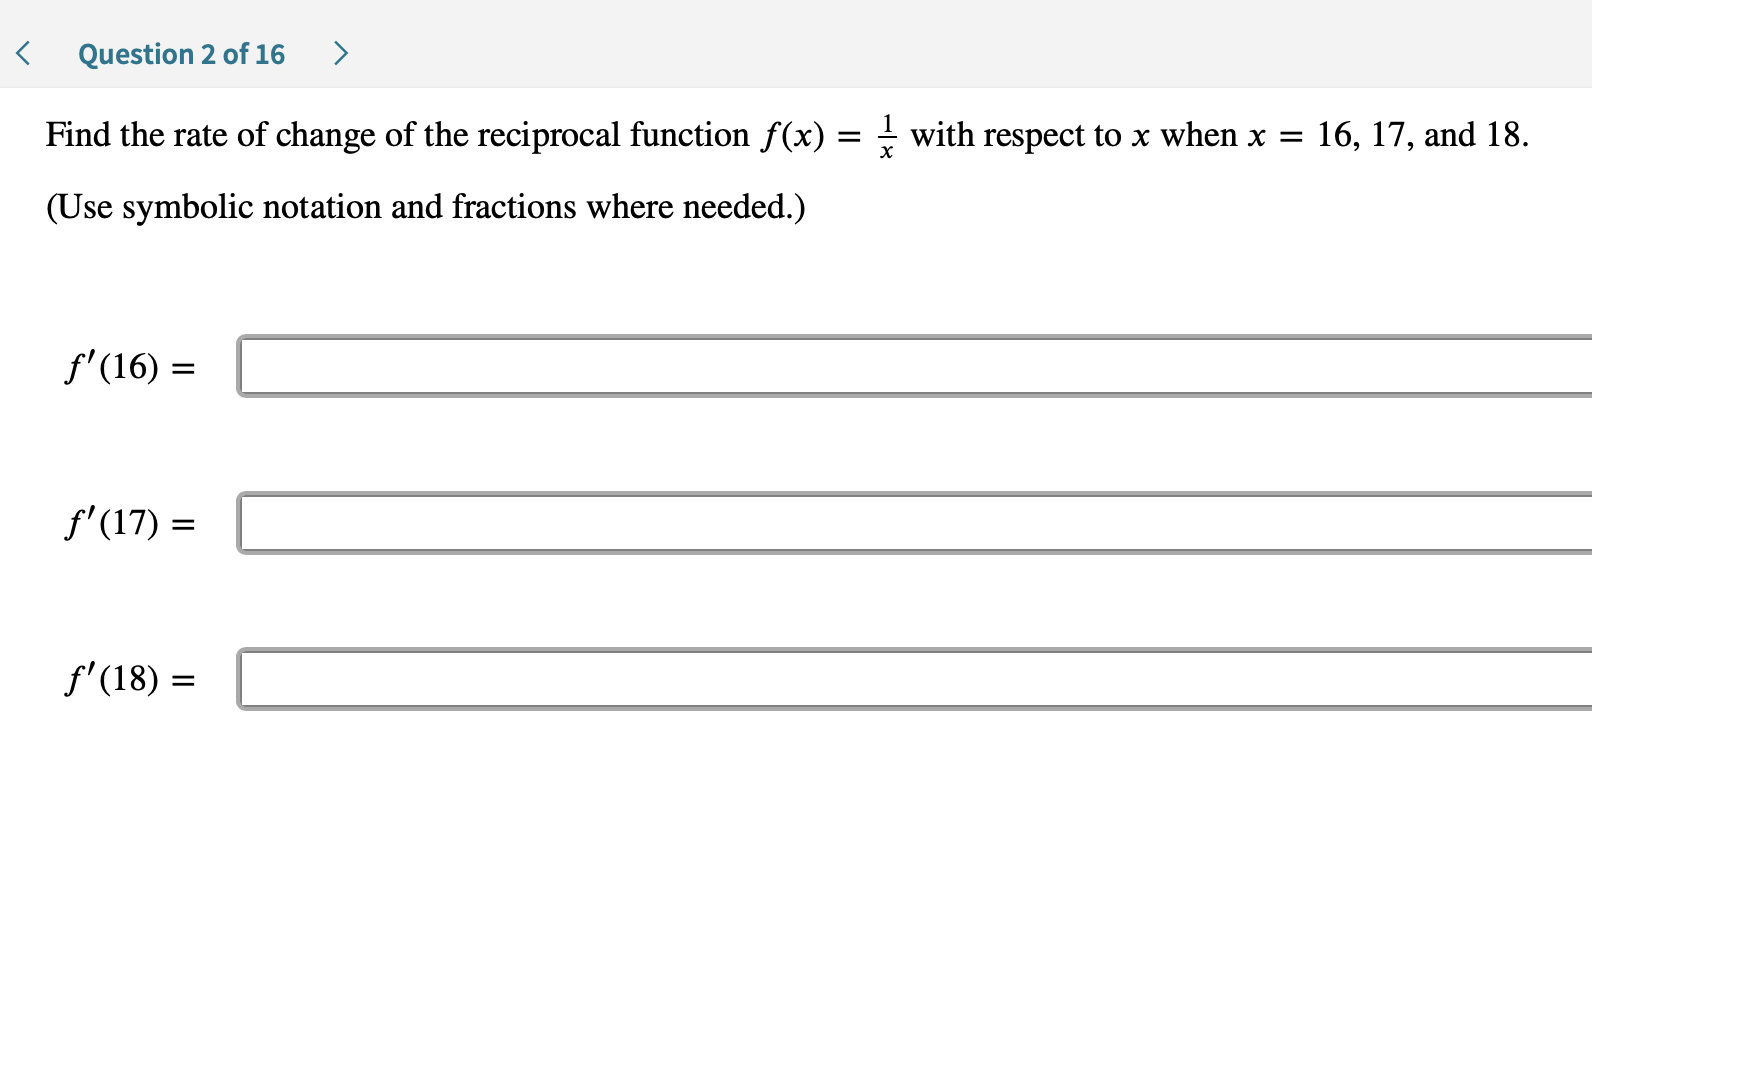 >
Question 2 of 16
Find the rate of change of the reciprocal function f(x) = - with respect to x when x =
16, 17, and 18.
(Use symbolic notation and fractions where needed.)
f'(16)
f'(17)
f'(18)
